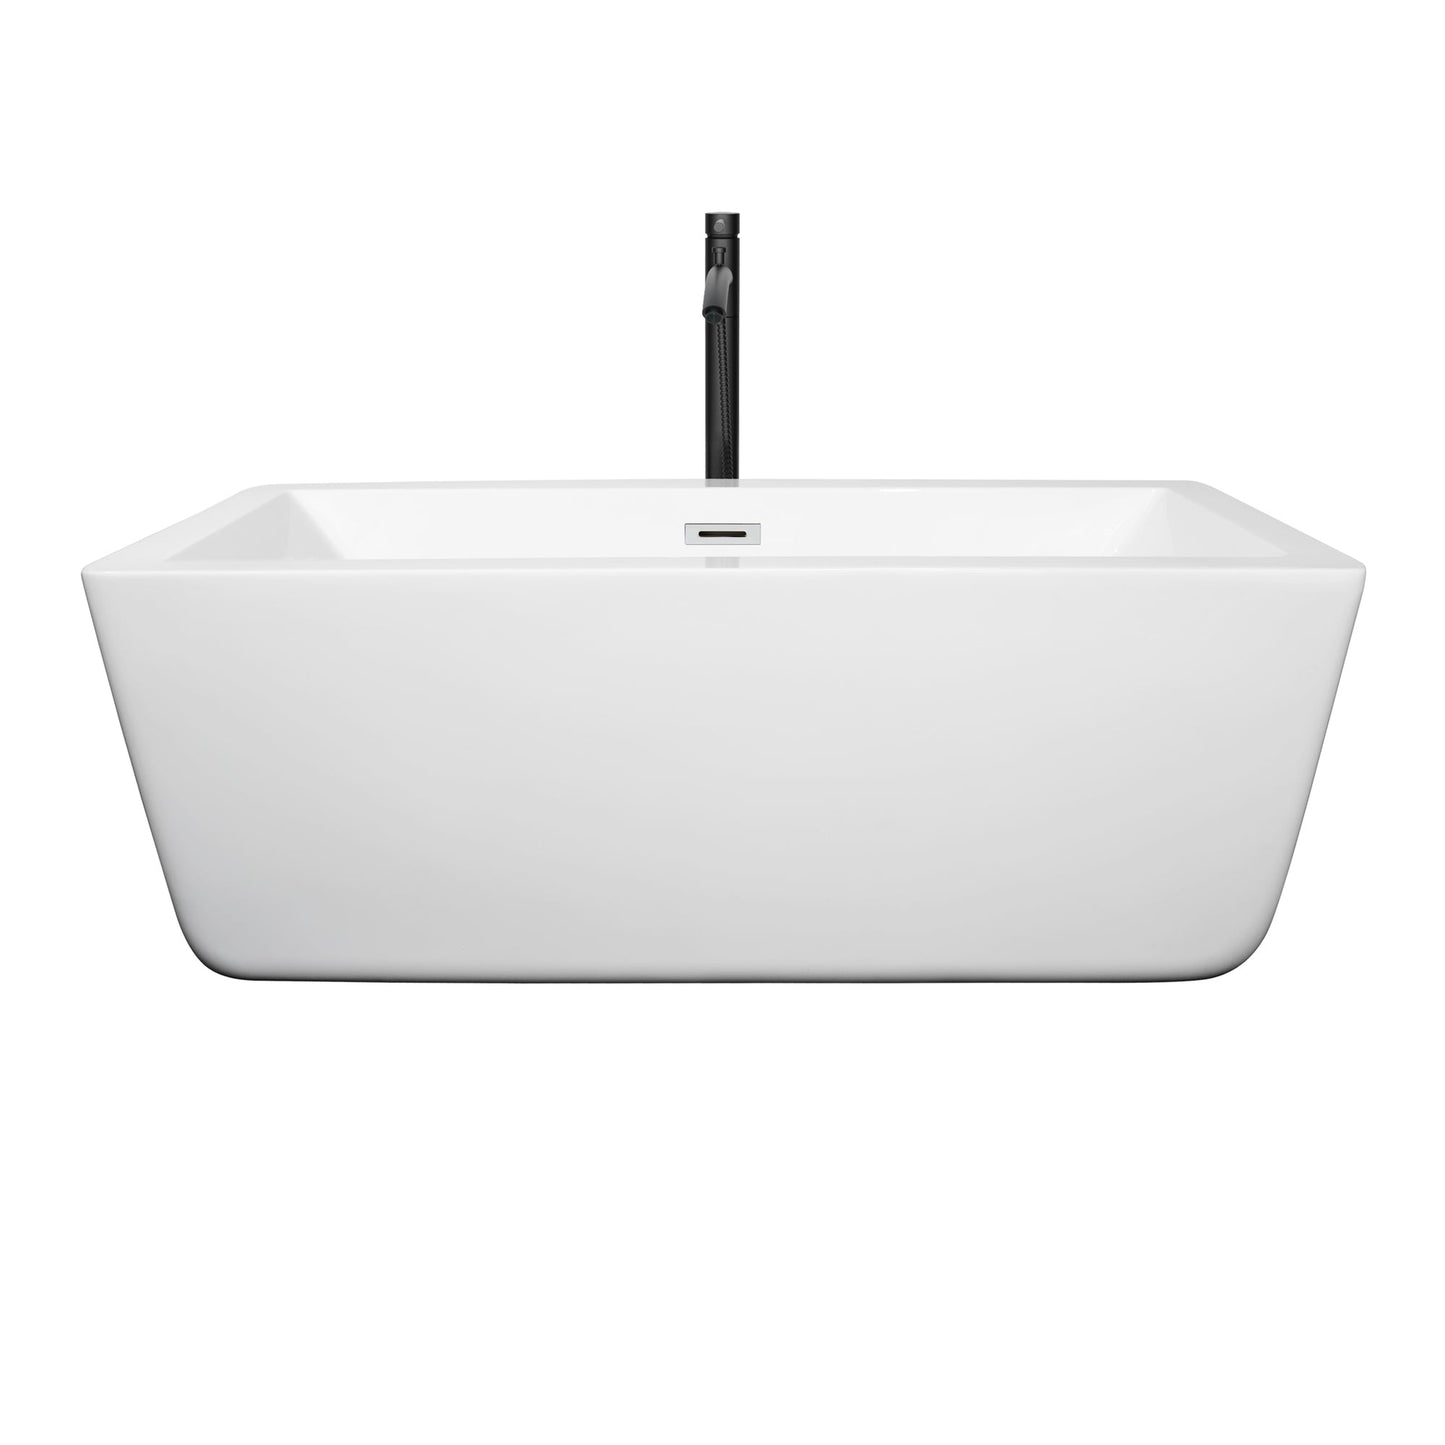 Wyndham Collection Laura 59" Freestanding Bathtub in White With Polished Chrome Trim and Floor Mounted Faucet in Matte Black